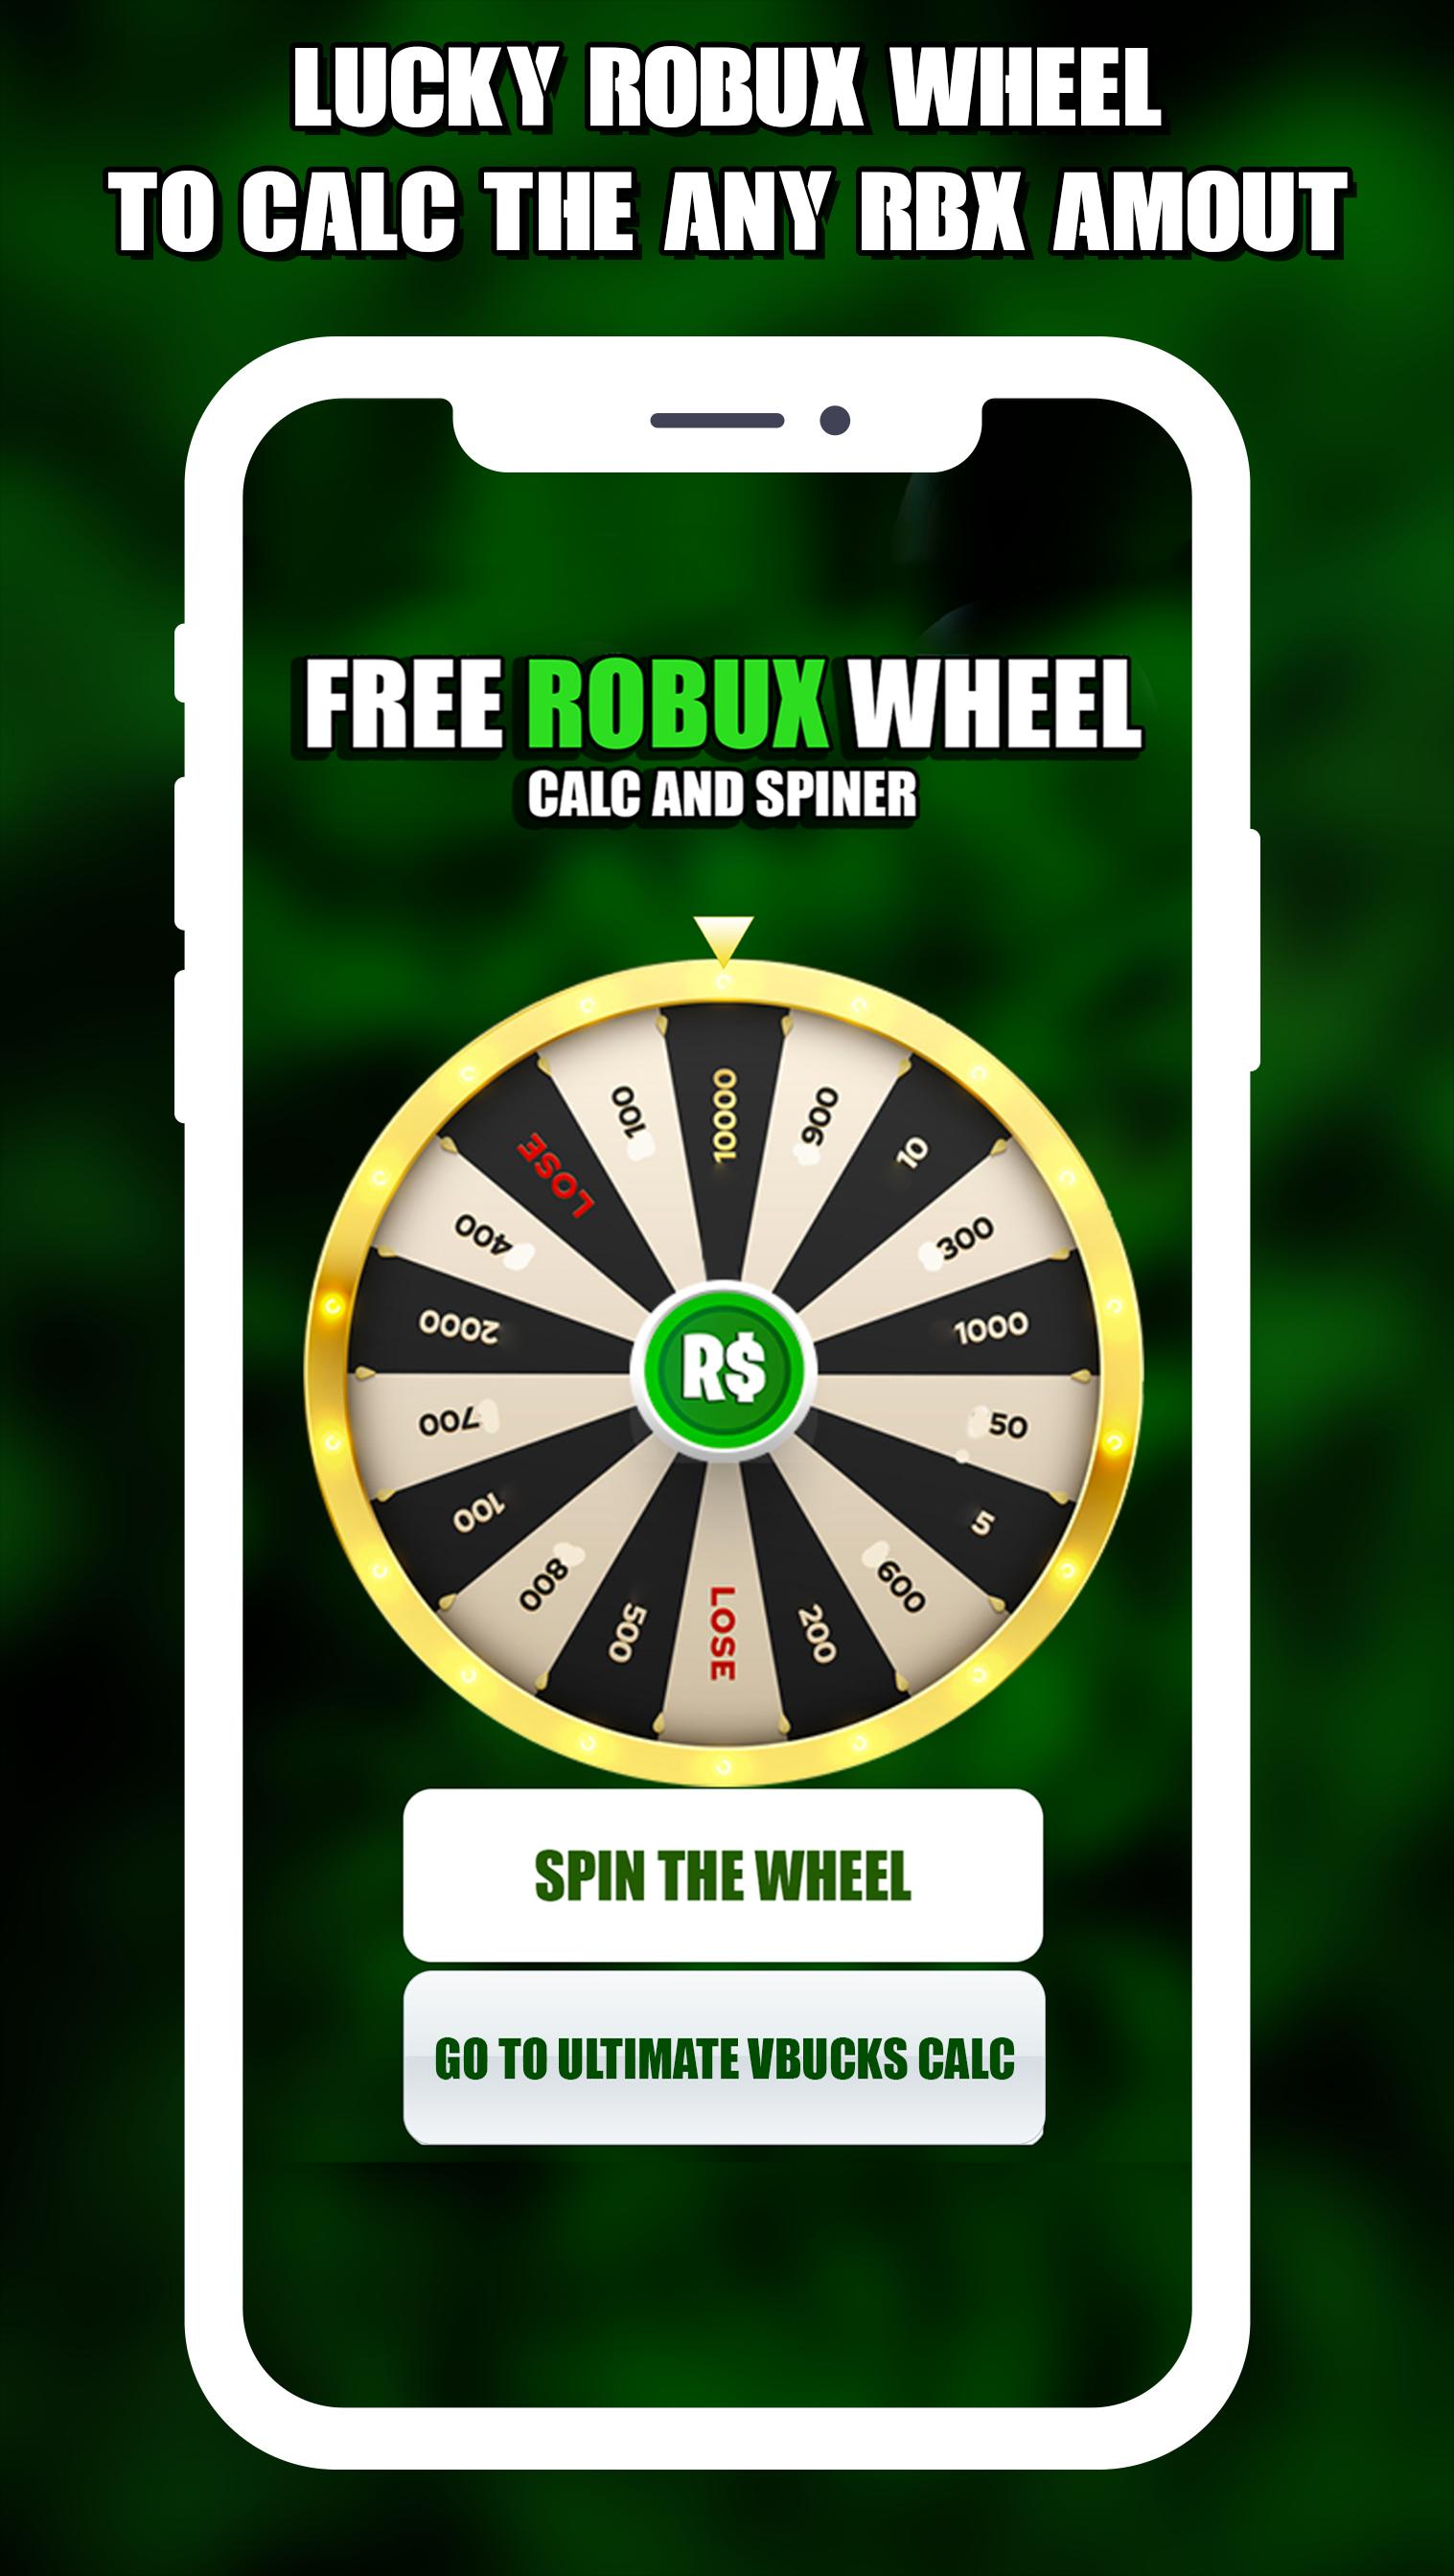 Robux 2020 Free Robux Spin Wheel For Robloxs For Android Apk - how to give your friend robux 2020 mobile